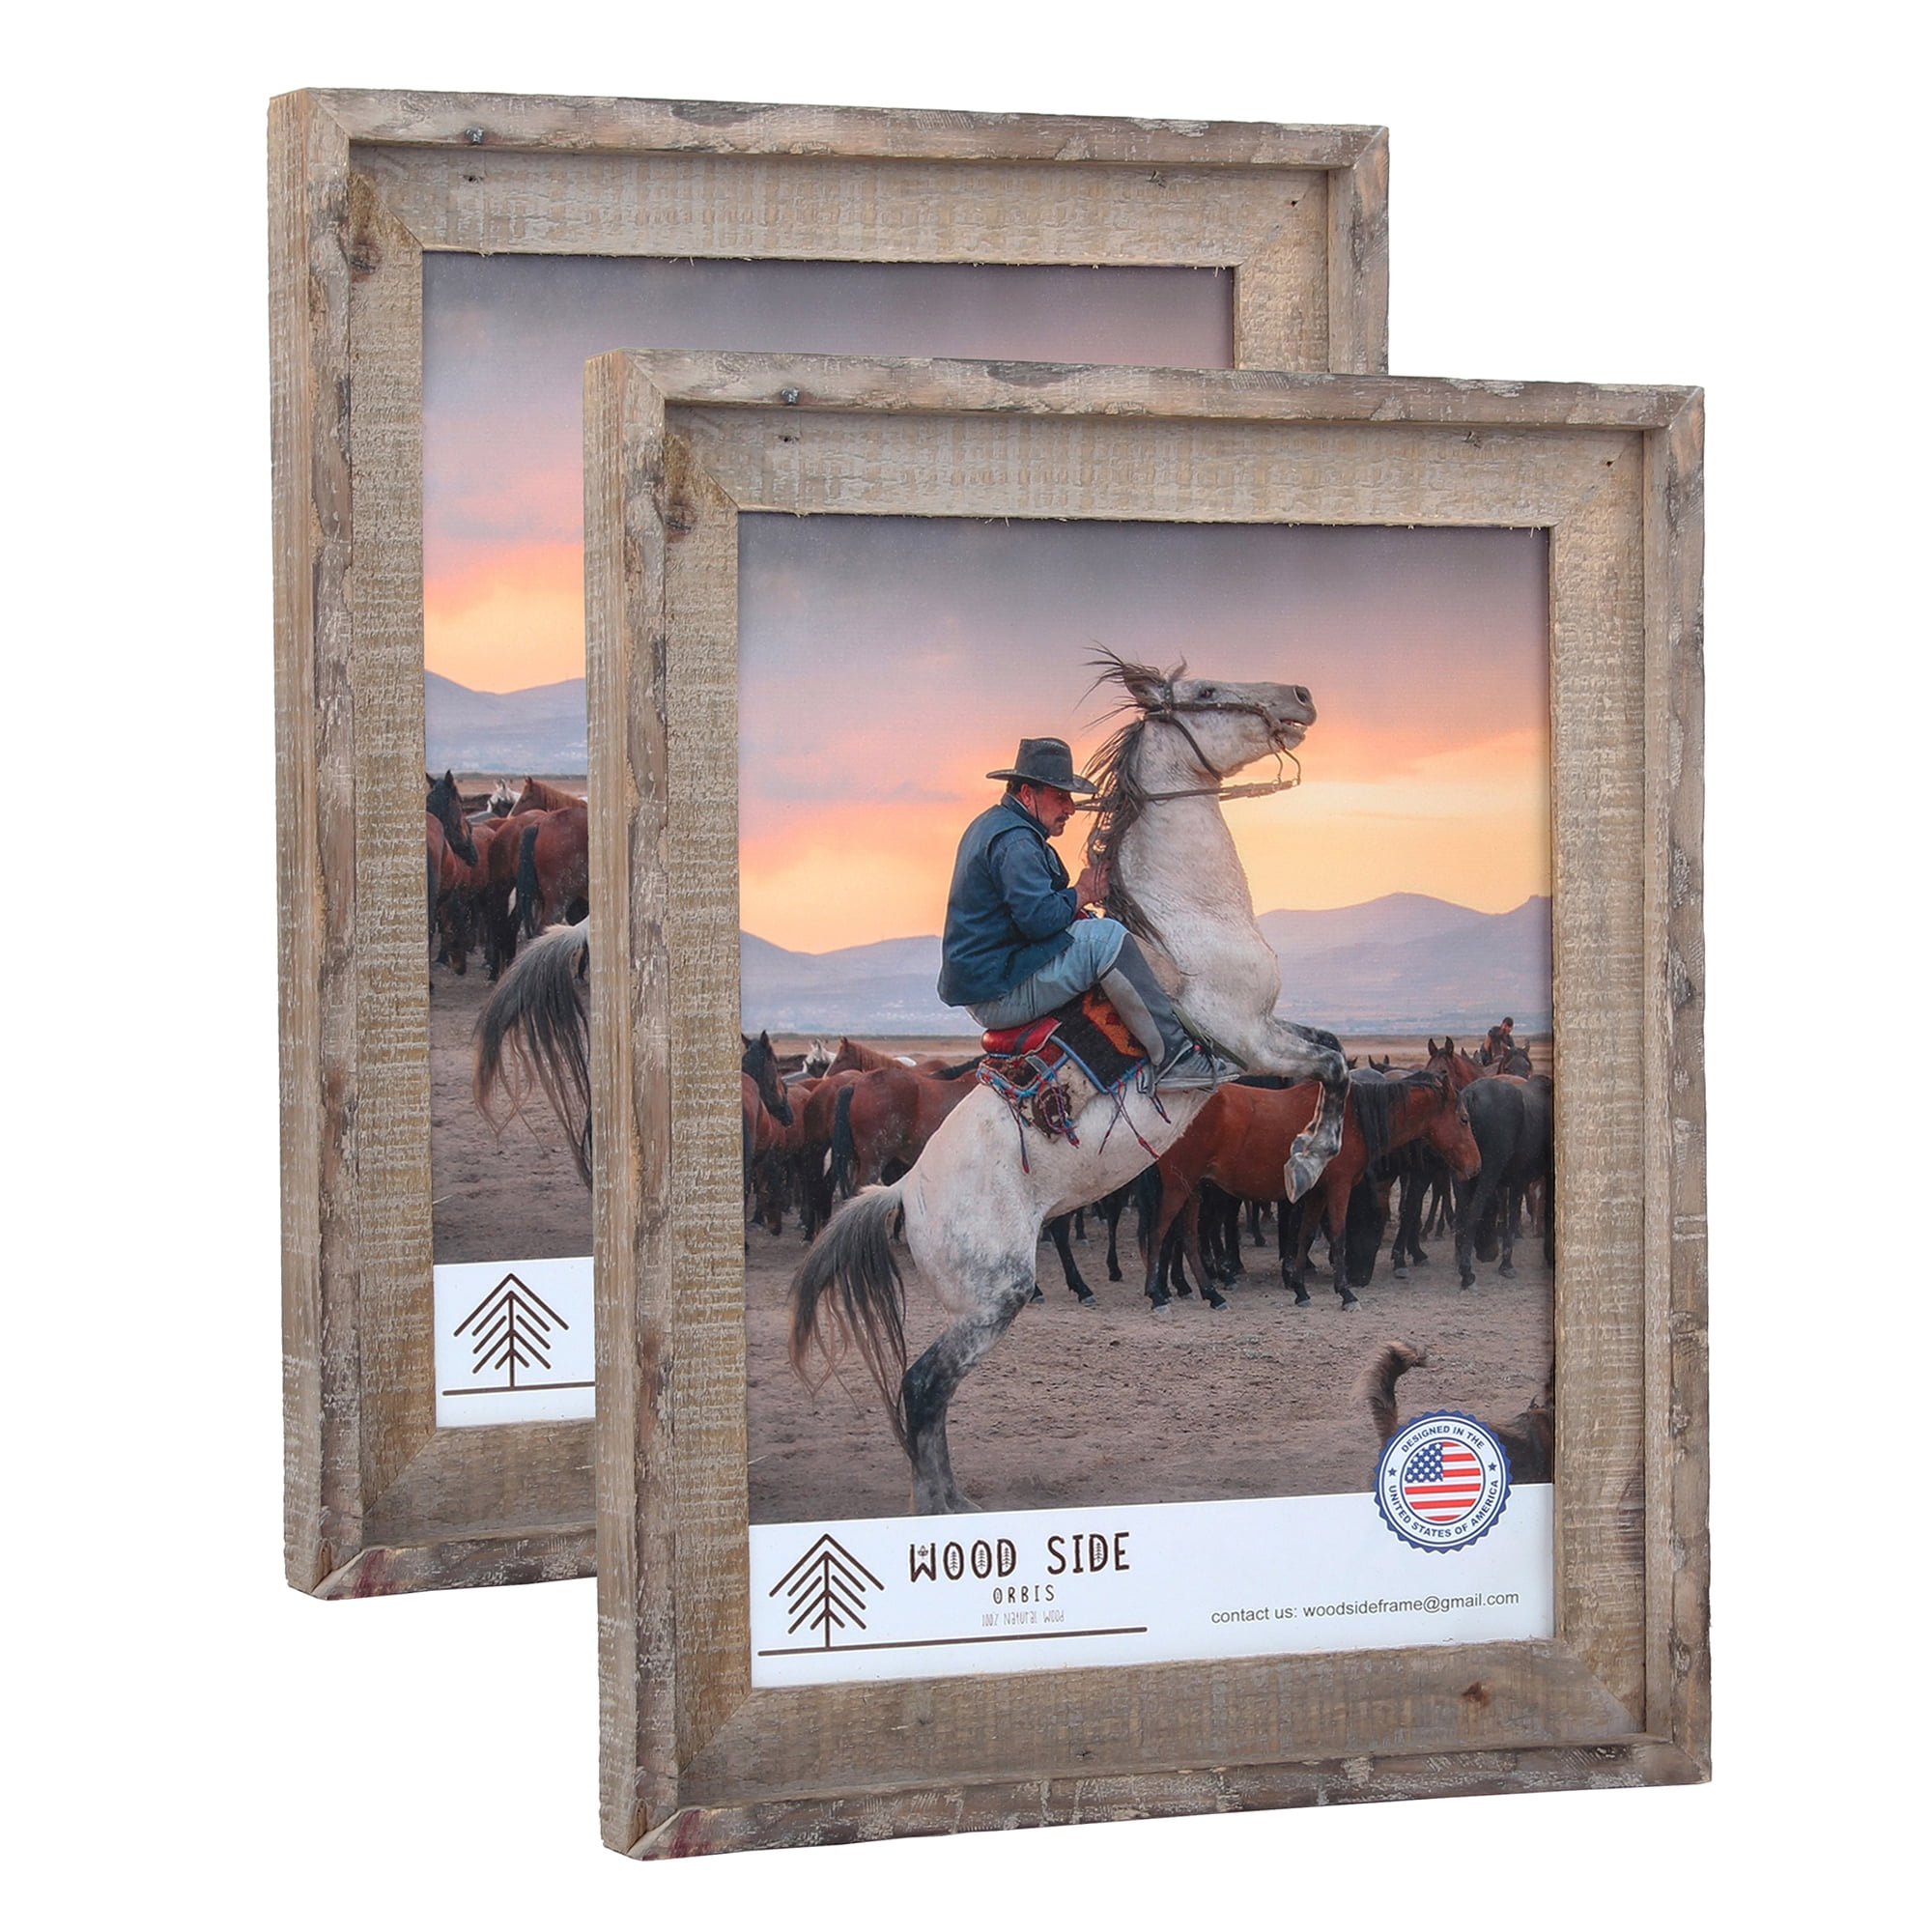 4x10 Picture Frame - Rustic Picture Frame Complete With UV Acrylic, - Bed  Bath & Beyond - 35888924